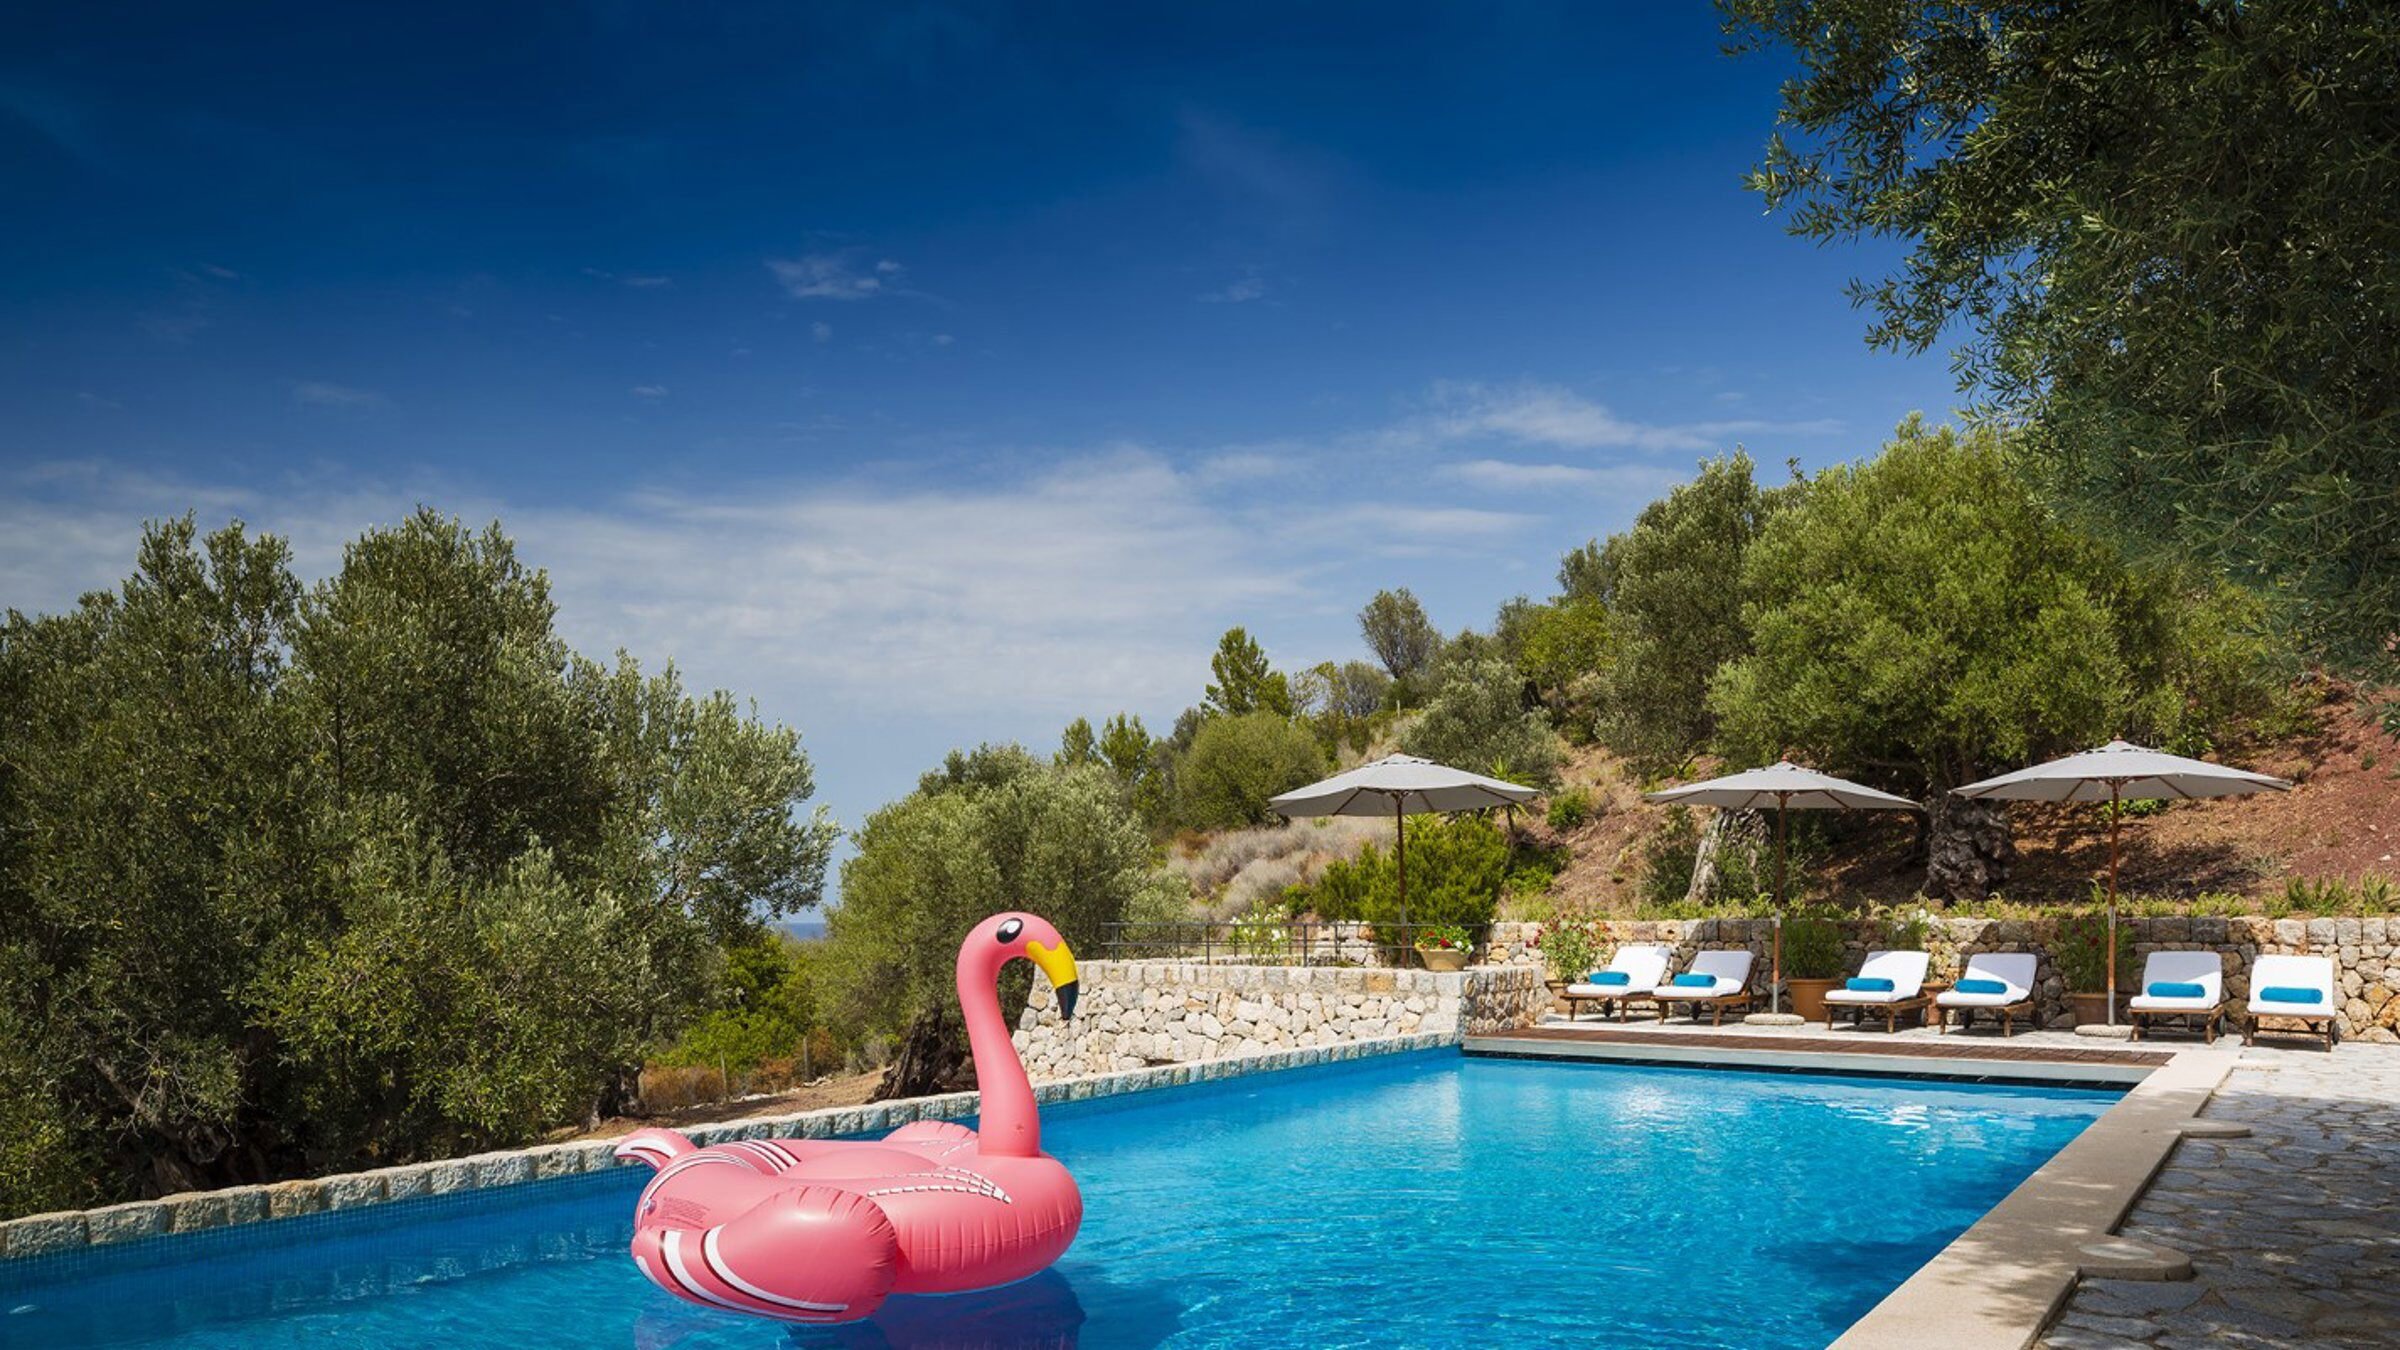 Swimming Pool With Pink Flamingo In Floating And Sunbeds On Side